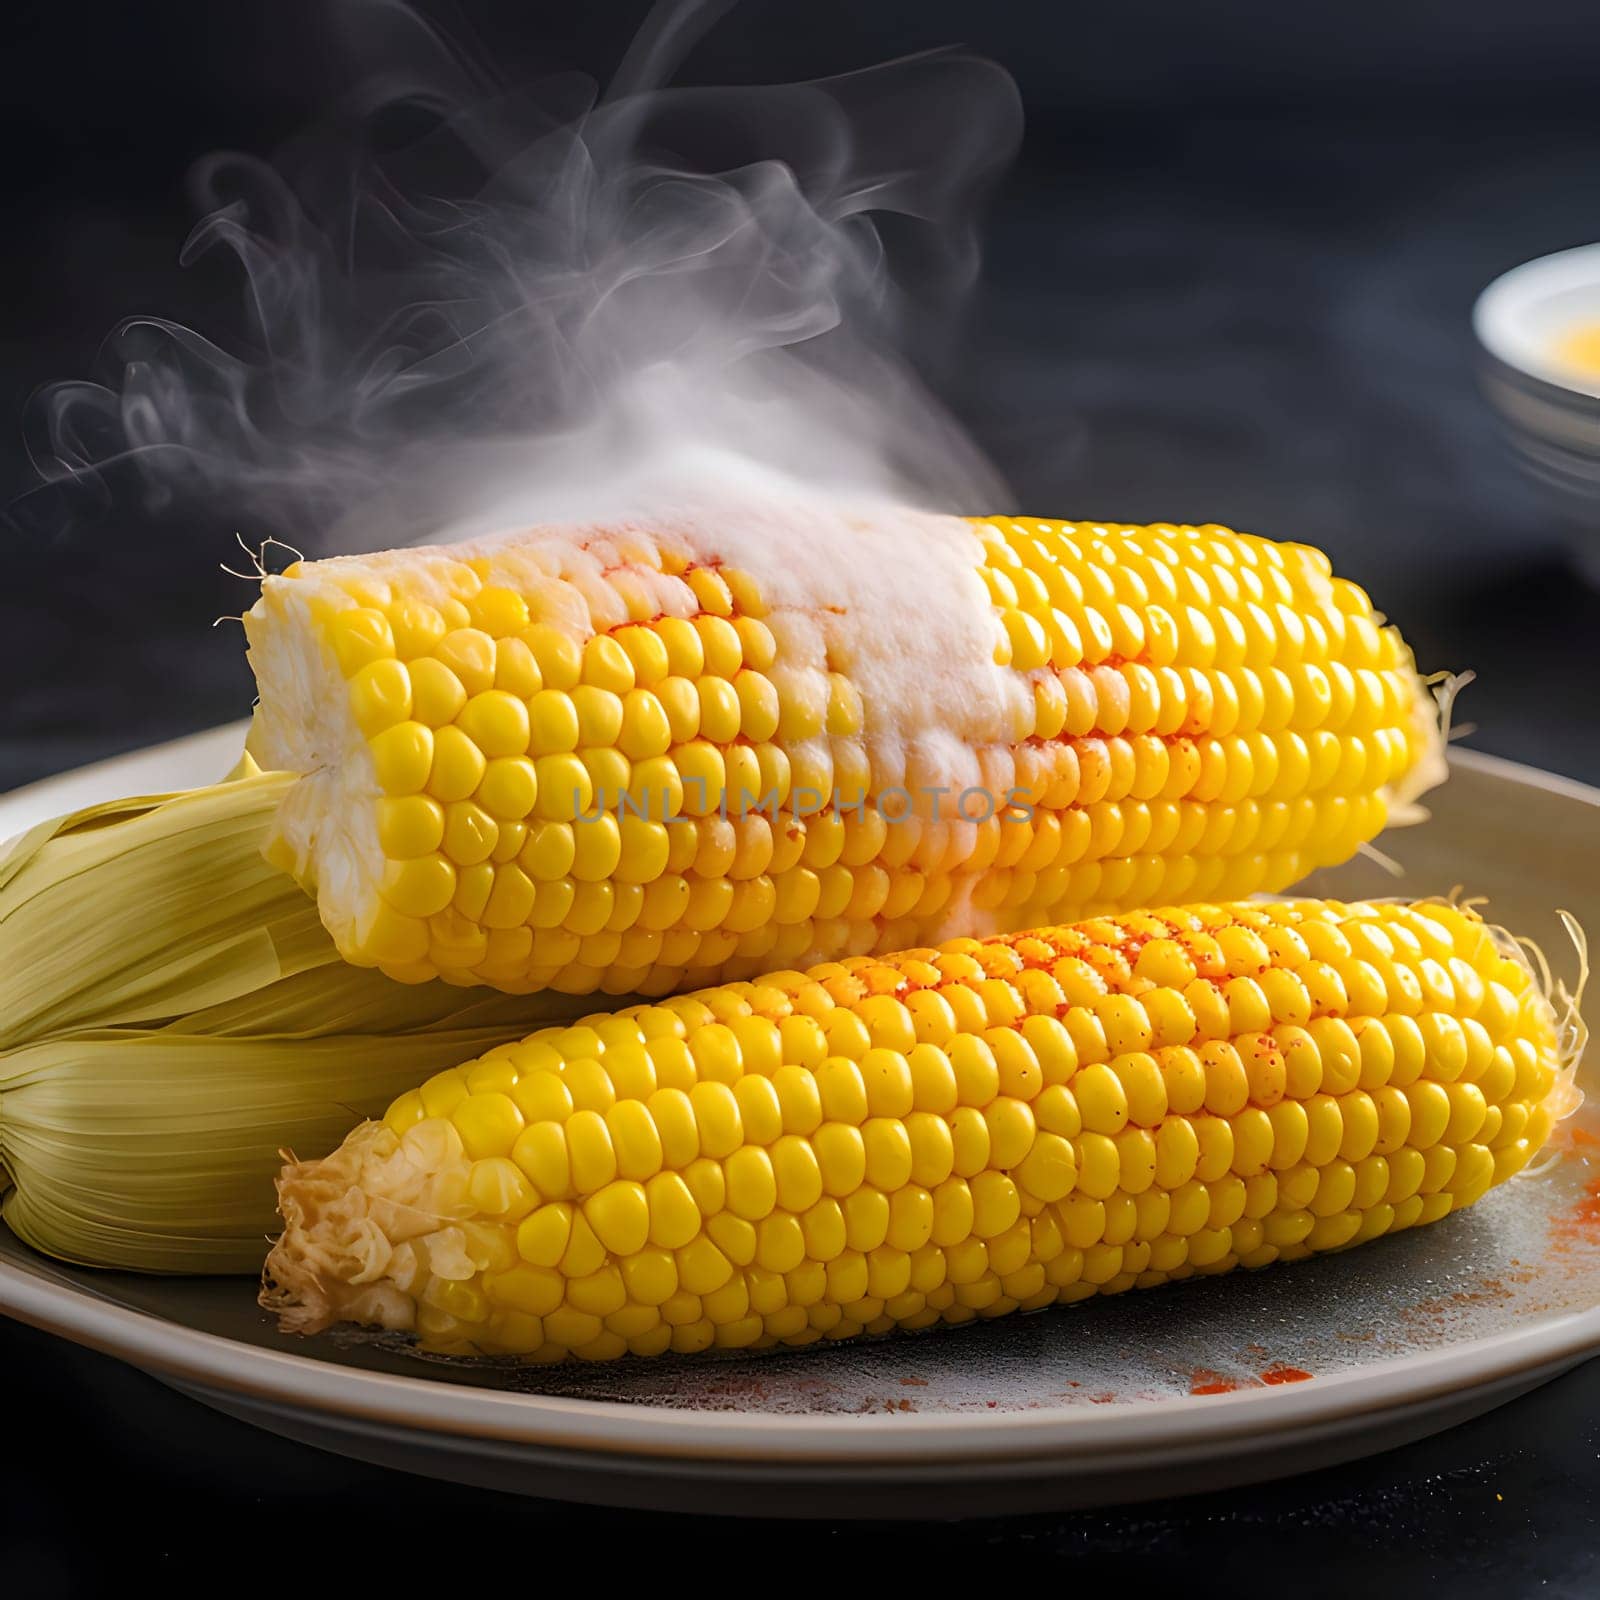 Yellow corn cobs cooked on a plate with steam. Corn as a dish of thanksgiving for the harvest. by ThemesS